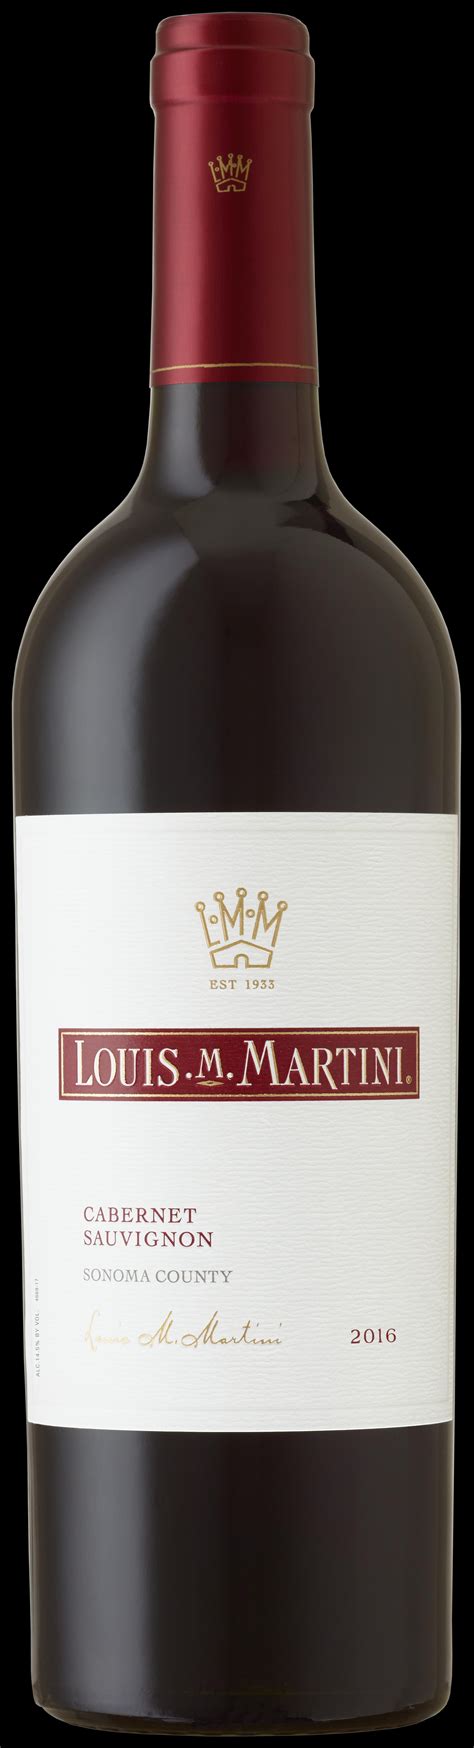 Louis m martini. Located in the heart of the Napa Valley, our tasting room celebrates our storied history and acclaimed winemaking in every glass of wine we pour. Daily offerings at Louis M. … 